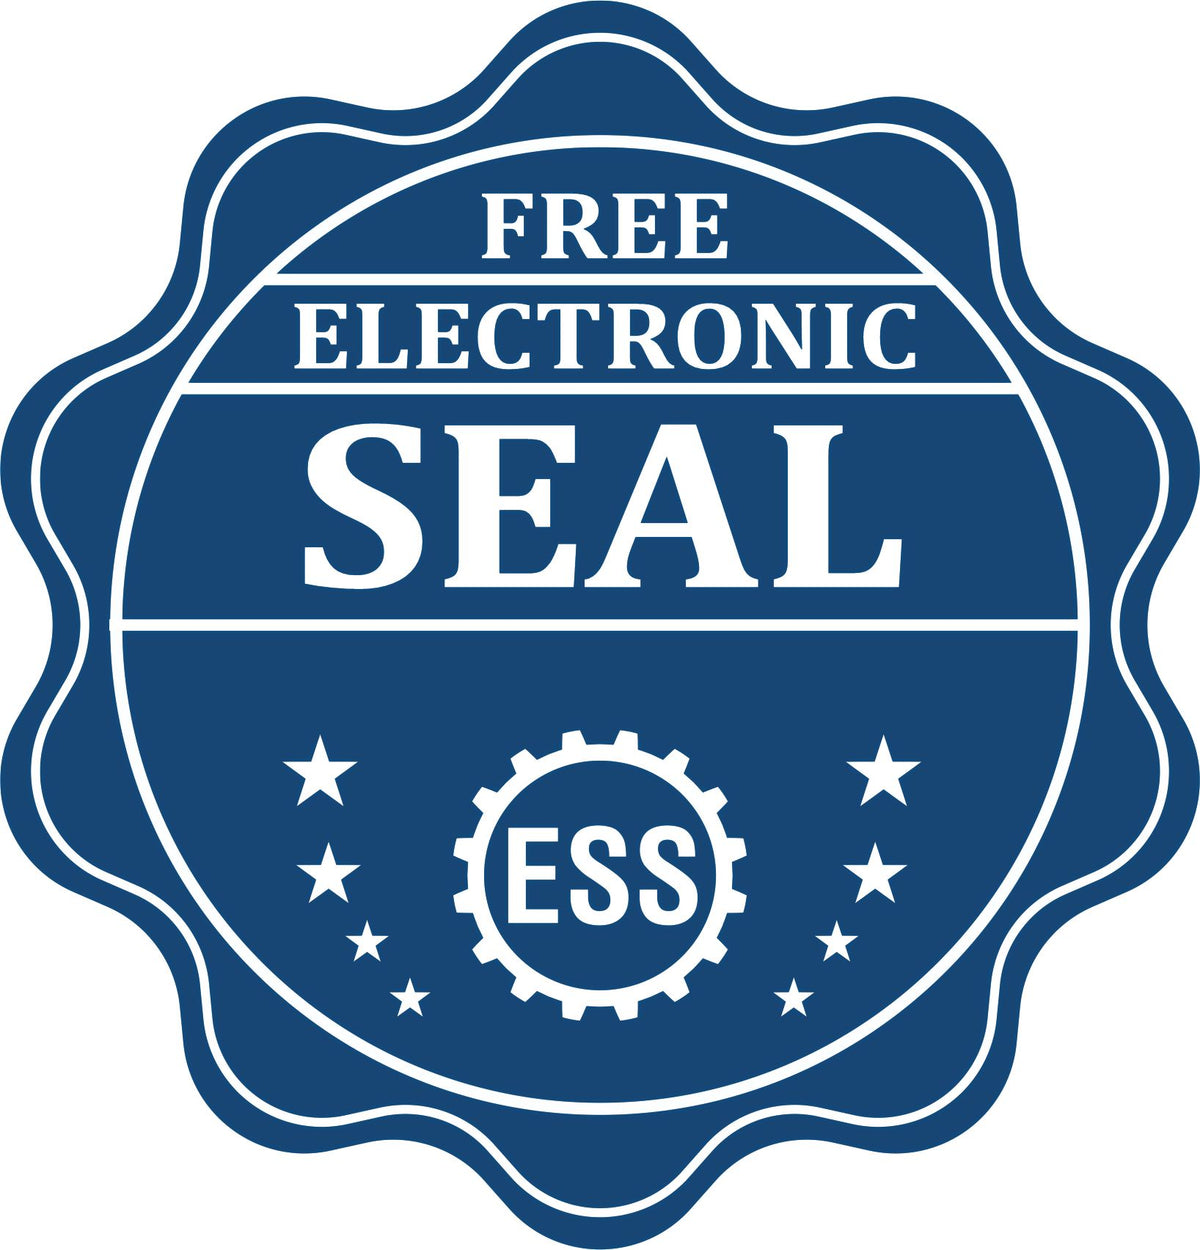 A badge showing a free electronic seal for the Premium MaxLight Pre-Inked Idaho Landscape Architectural Stamp with stars and the ESS gear on the emblem.